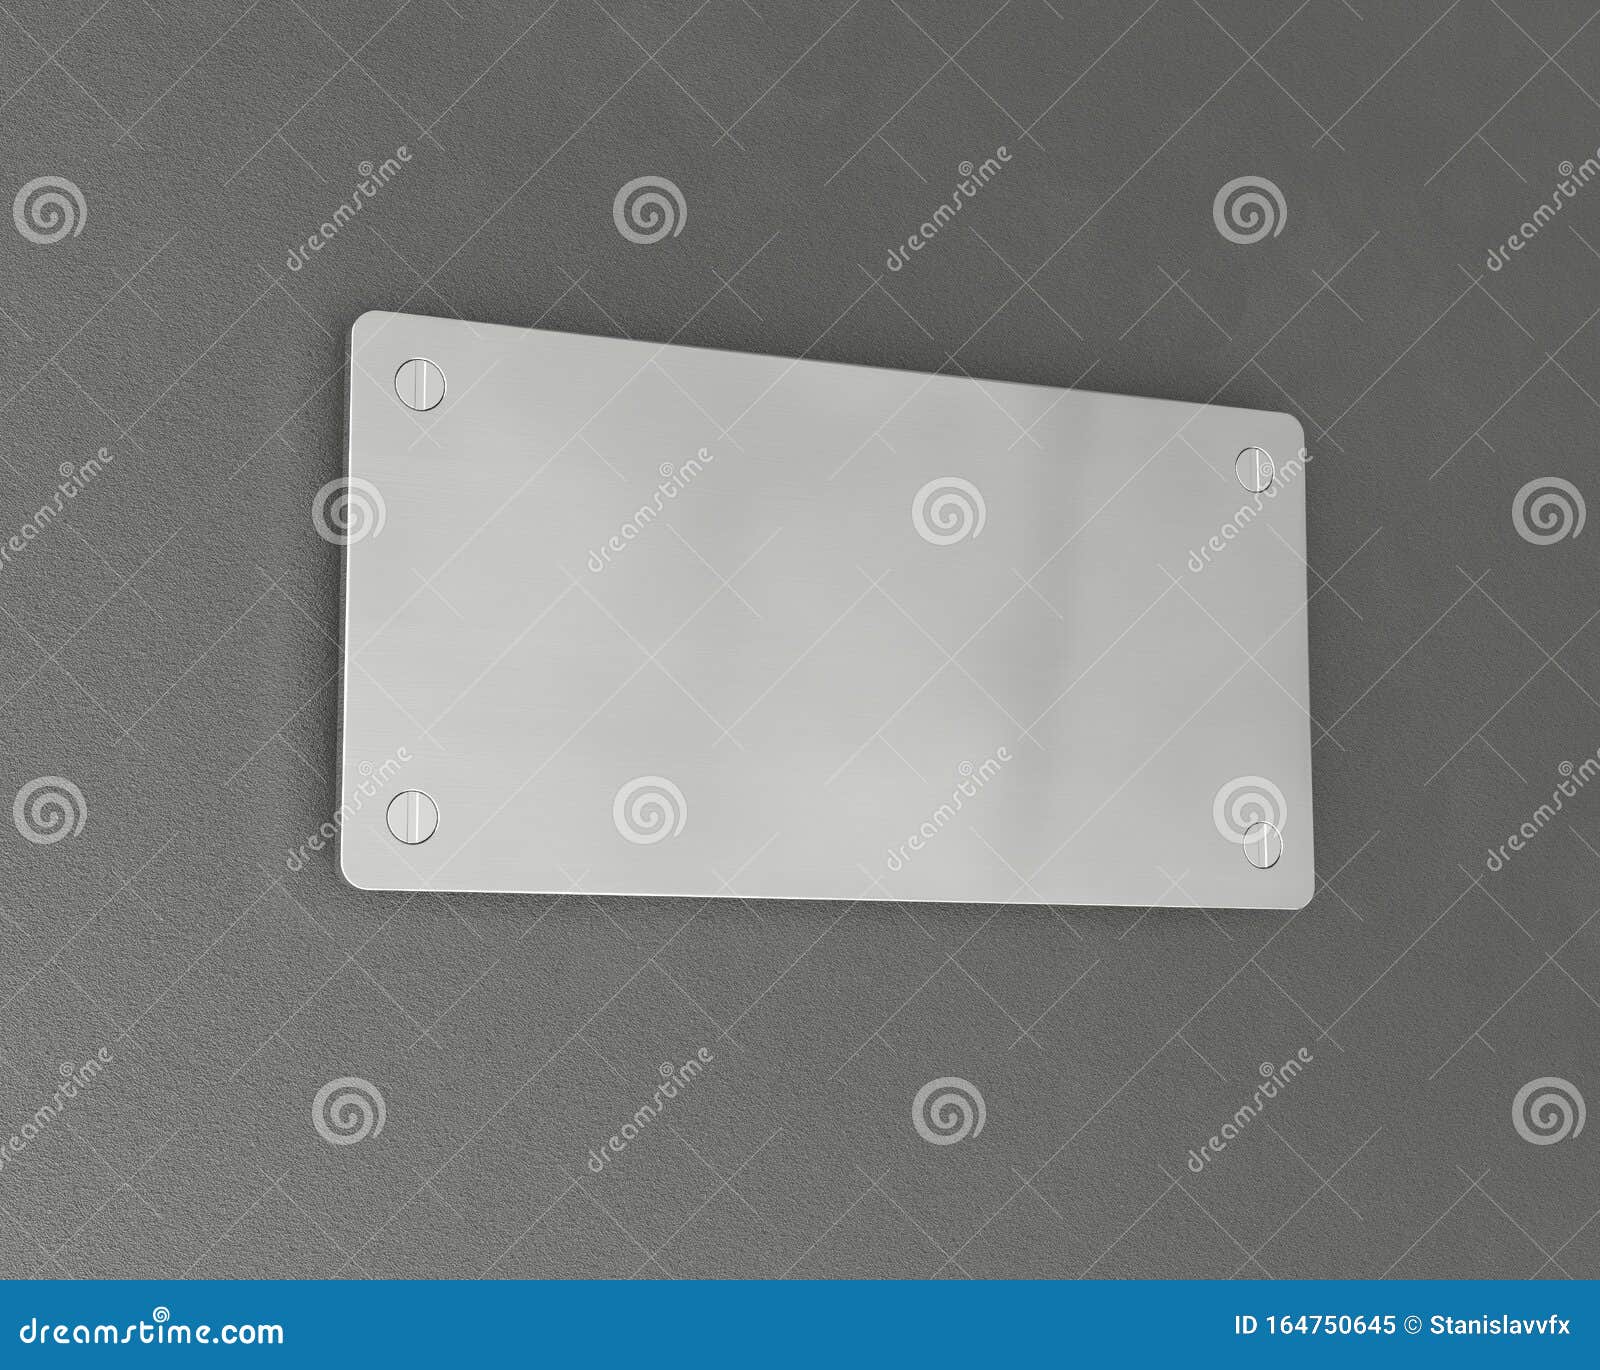 Nameplate Template Free from thumbs.dreamstime.com